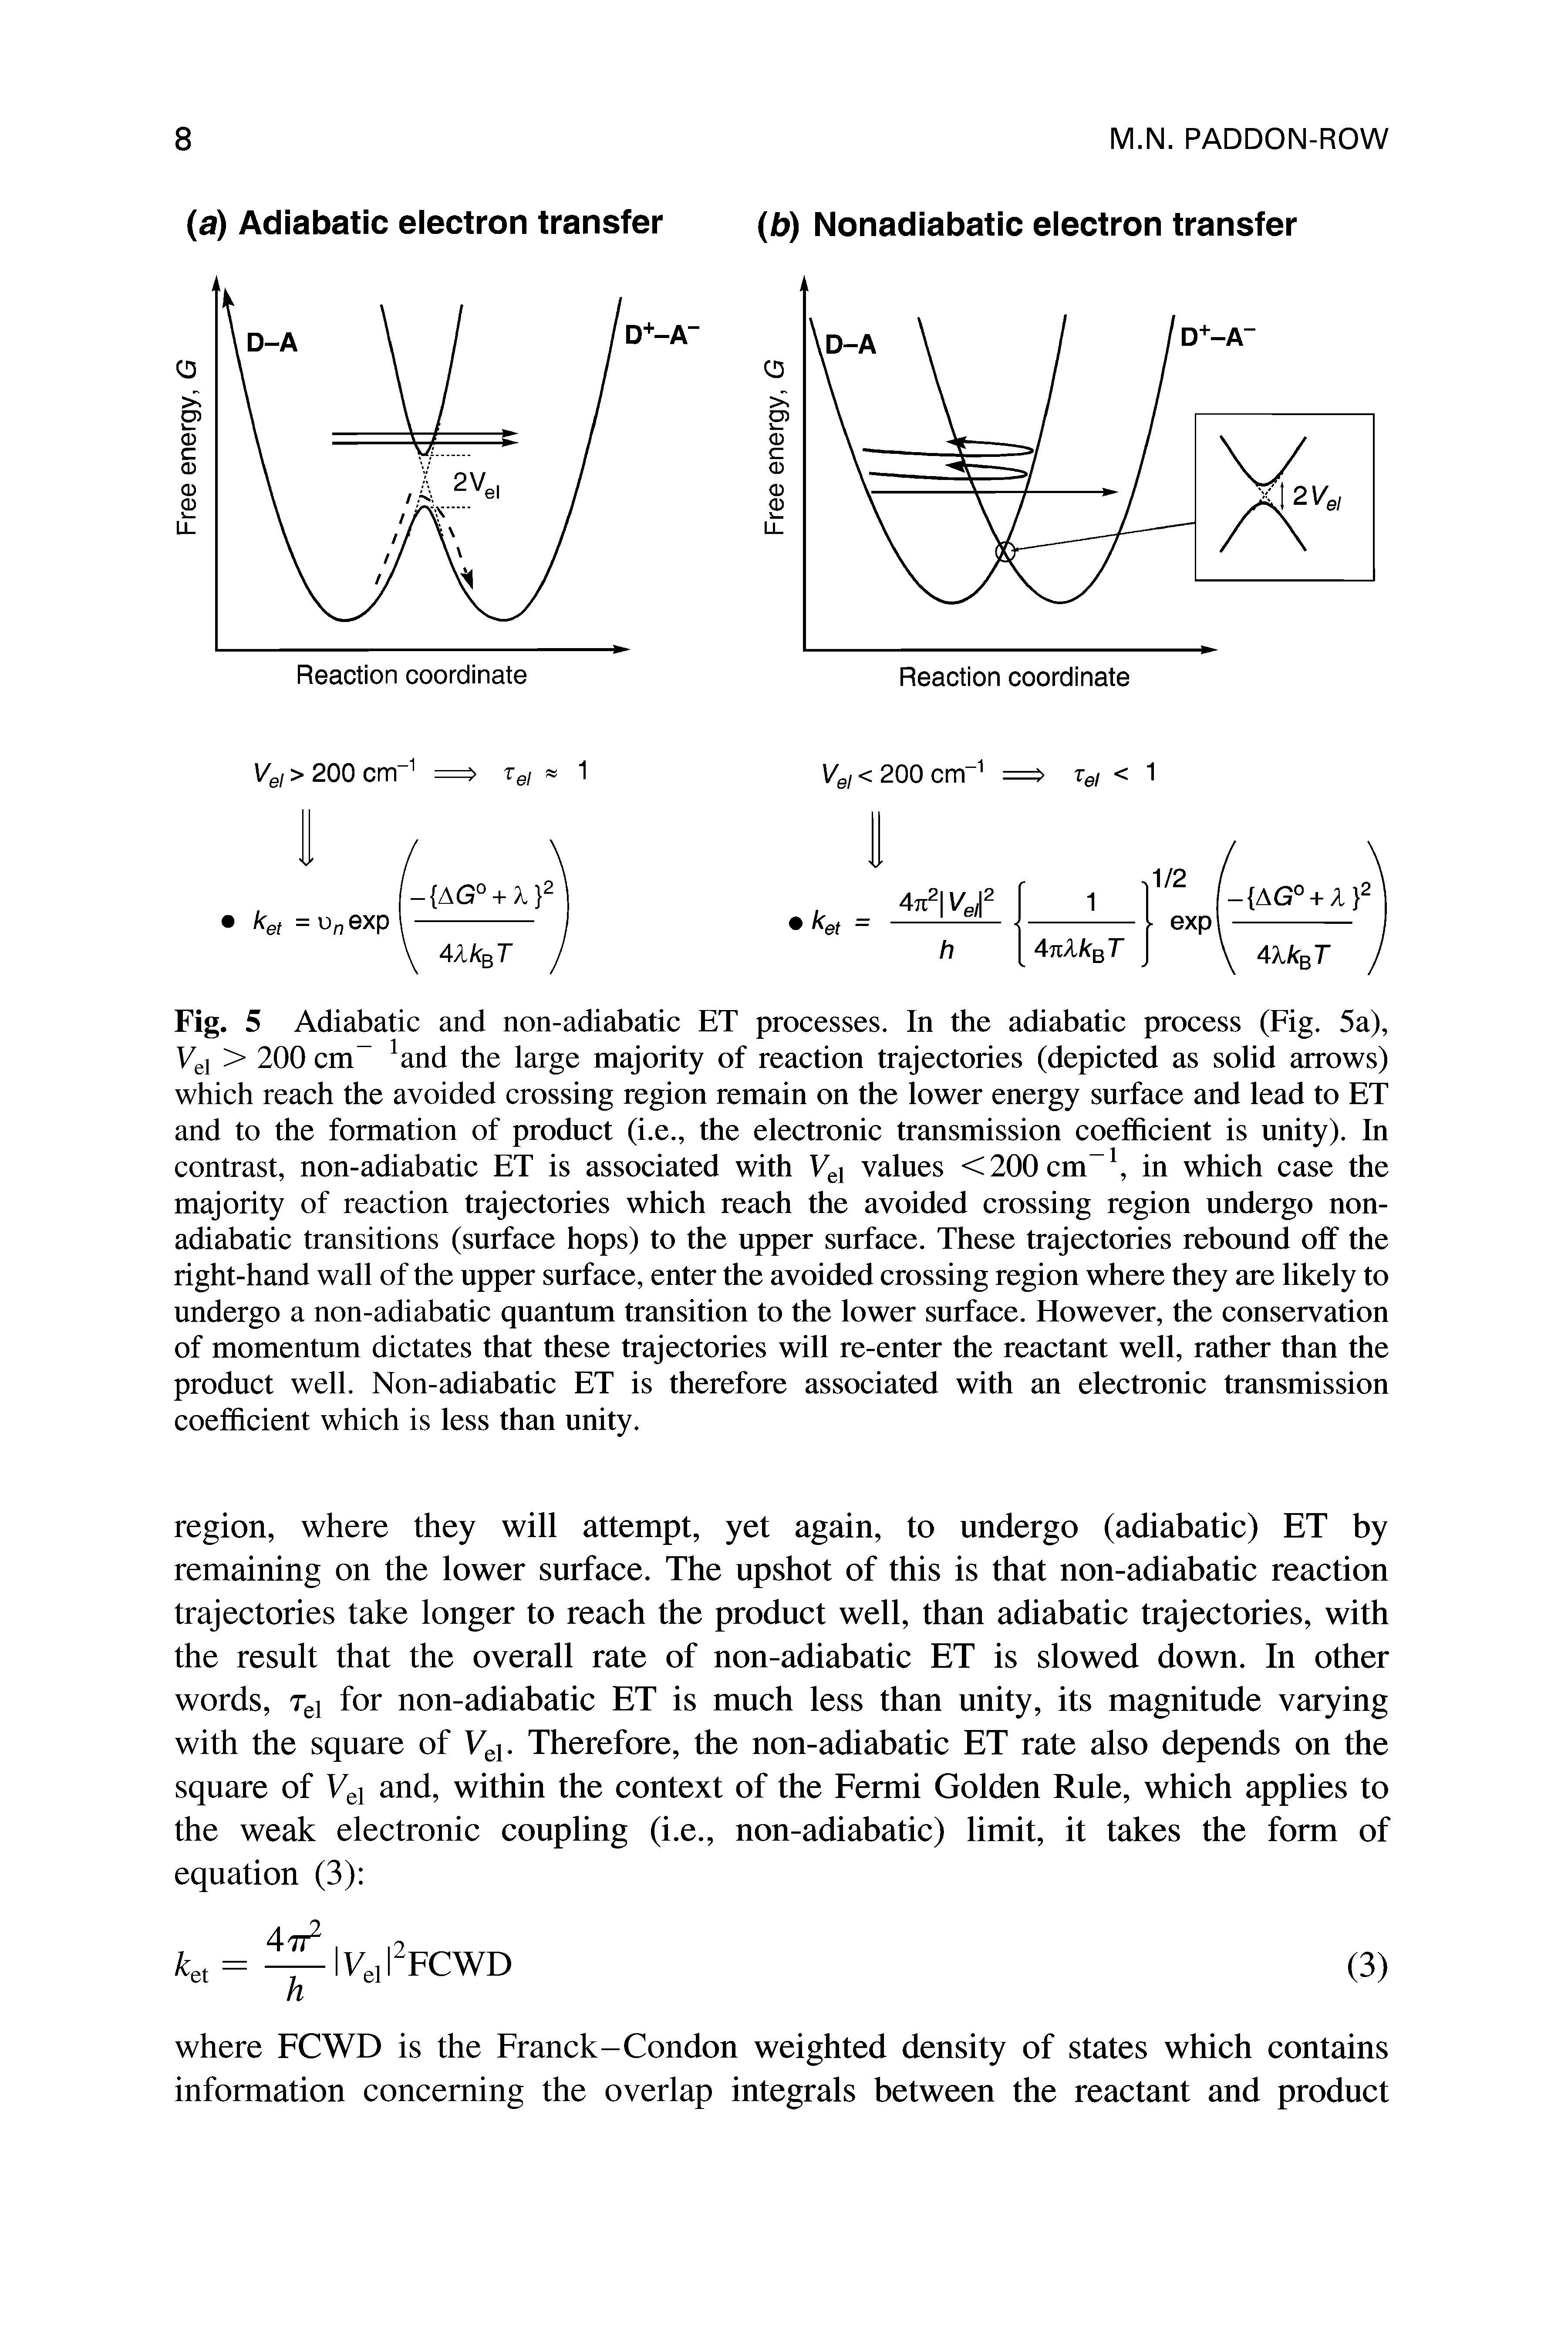 Fig. 5 Adiabatic and non-adiabatic ET processes. In the adiabatic process (Fig. 5a), Vel > 200 cm and the large majority of reaction trajectories (depicted as solid arrows) which reach the avoided crossing region remain on the lower energy surface and lead to ET and to the formation of product (i.e., the electronic transmission coefficient is unity). In contrast, non-adiabatic ET is associated with Vel values <200 cm-1, in which case the majority of reaction trajectories which reach the avoided crossing region undergo non-adiabatic transitions (surface hops) to the upper surface. These trajectories rebound off the right-hand wall of the upper surface, enter the avoided crossing region where they are likely to undergo a non-adiabatic quantum transition to the lower surface. However, the conservation of momentum dictates that these trajectories will re-enter the reactant well, rather than the product well. Non-adiabatic ET is therefore associated with an electronic transmission coefficient which is less than unity.